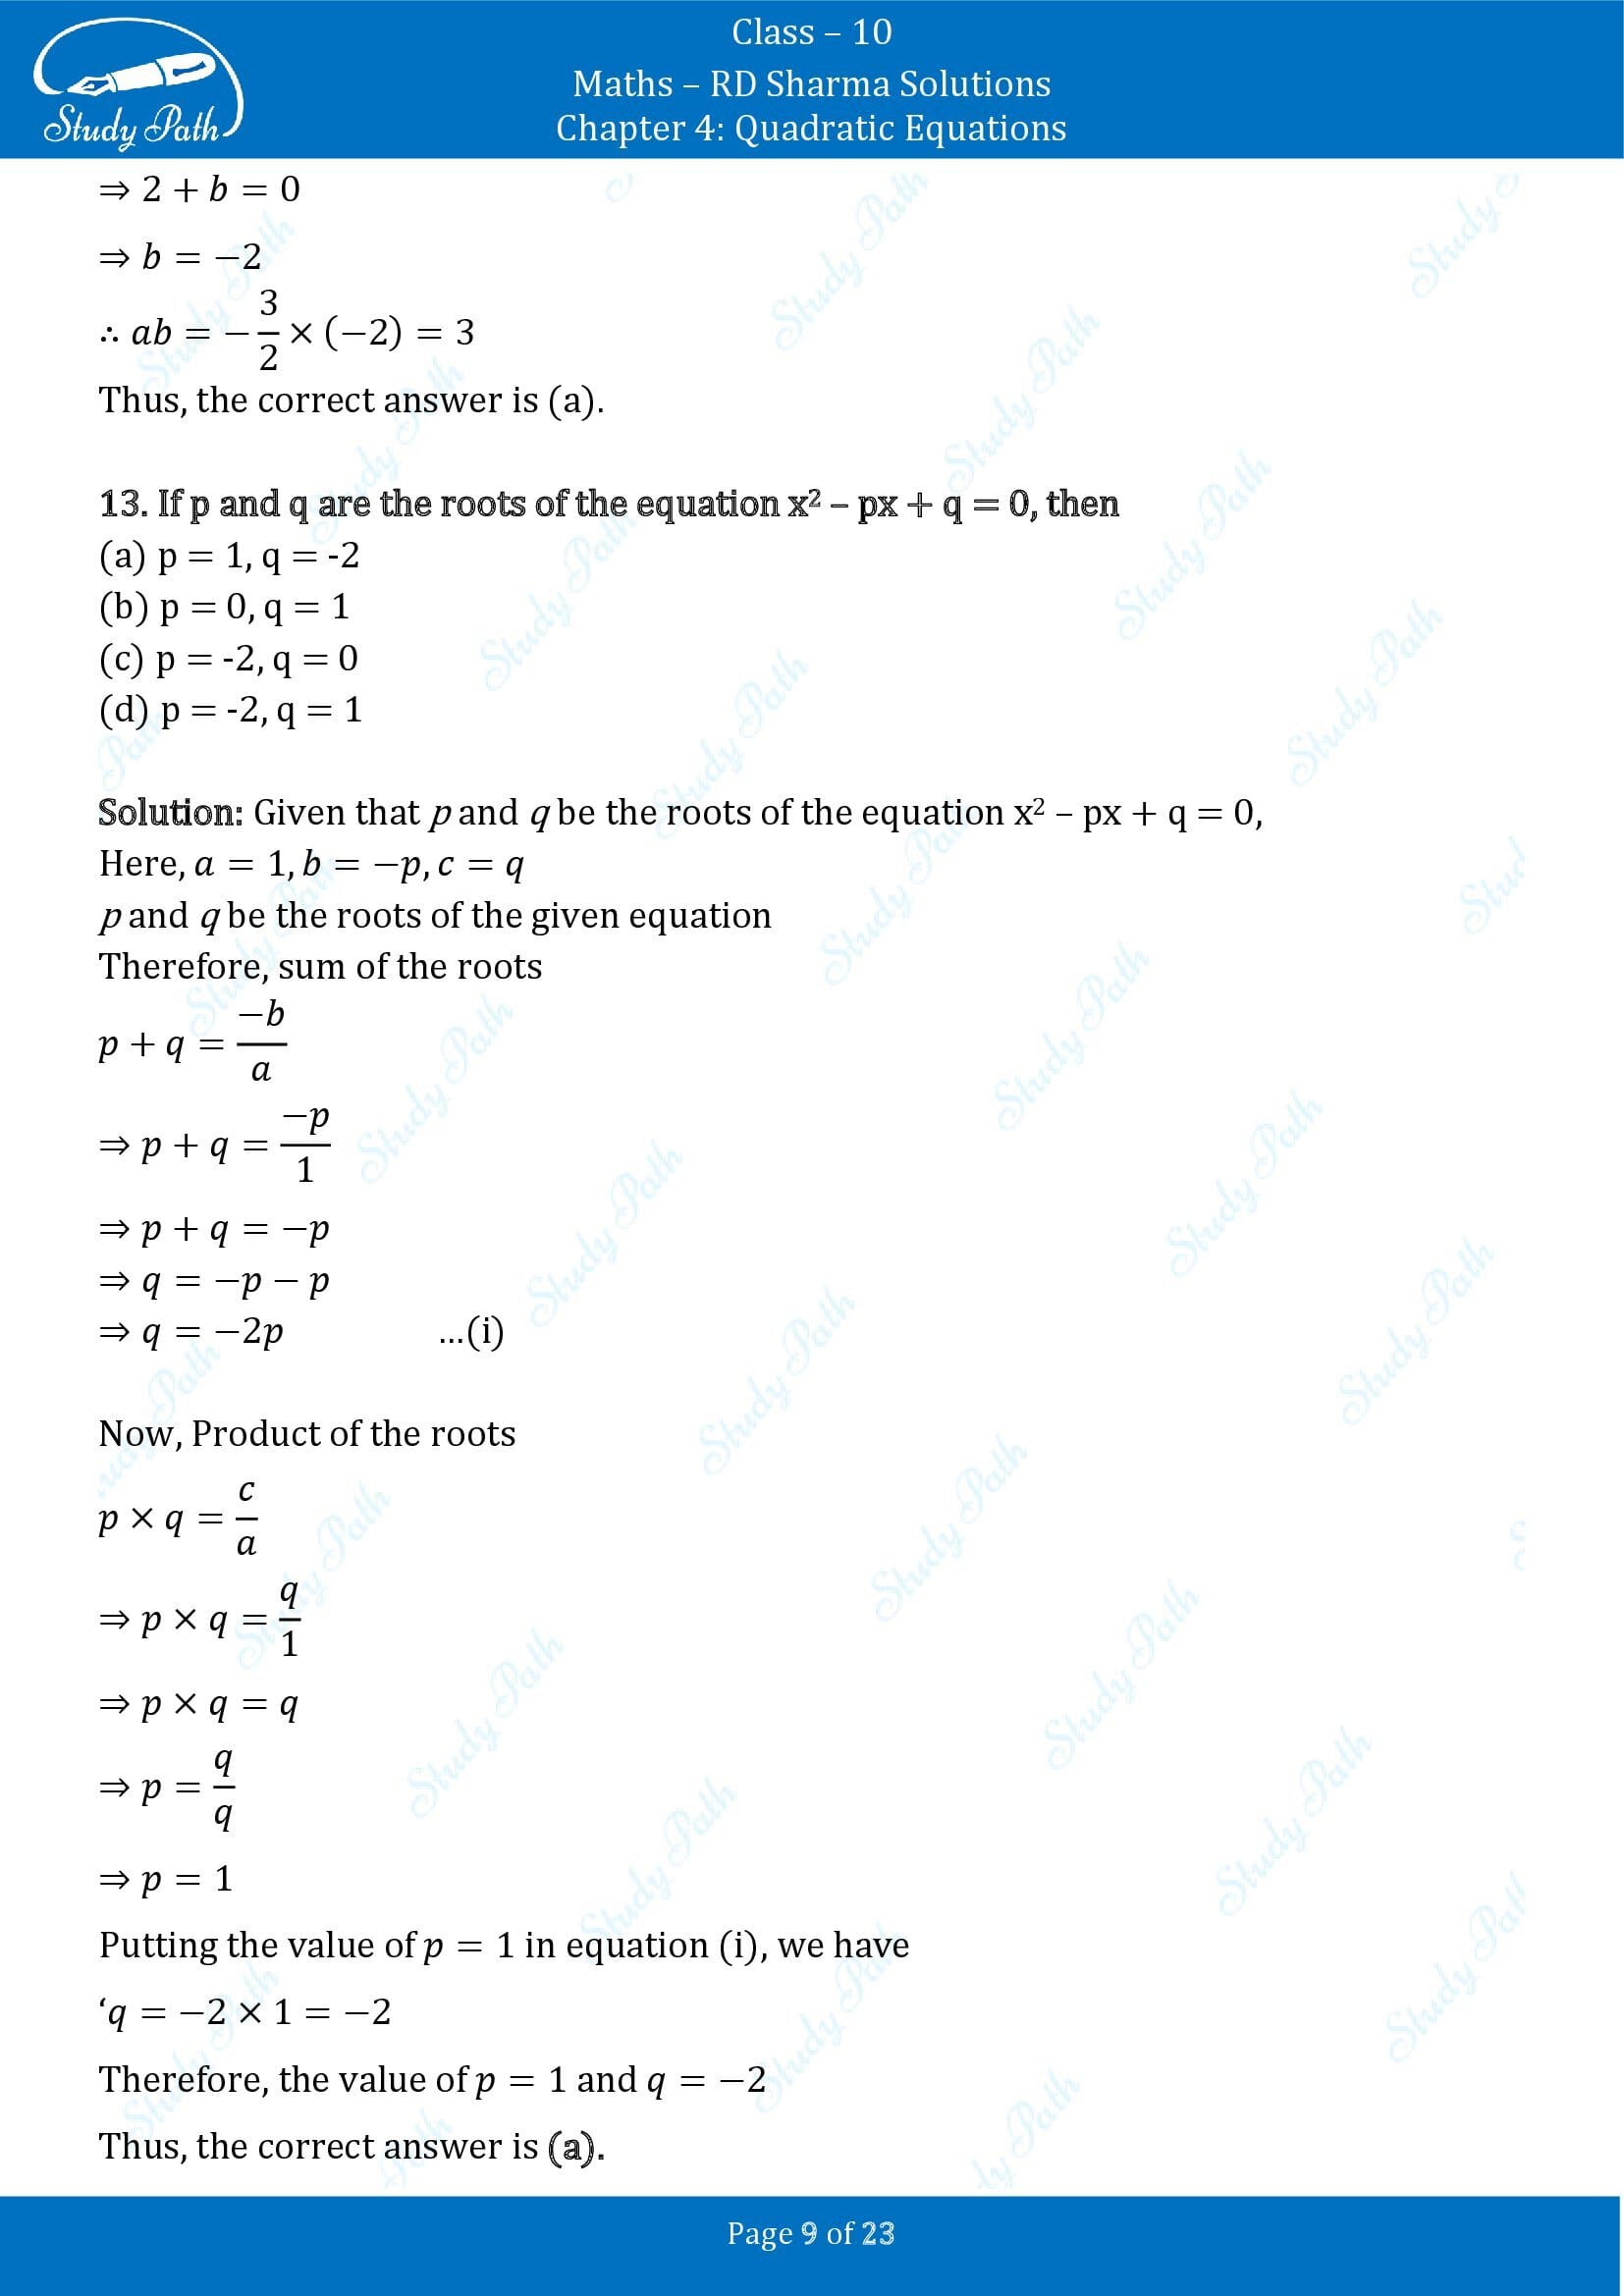 RD Sharma Solutions Class 10 Chapter 4 Quadratic Equations Multiple Choice Questions MCQs 00009